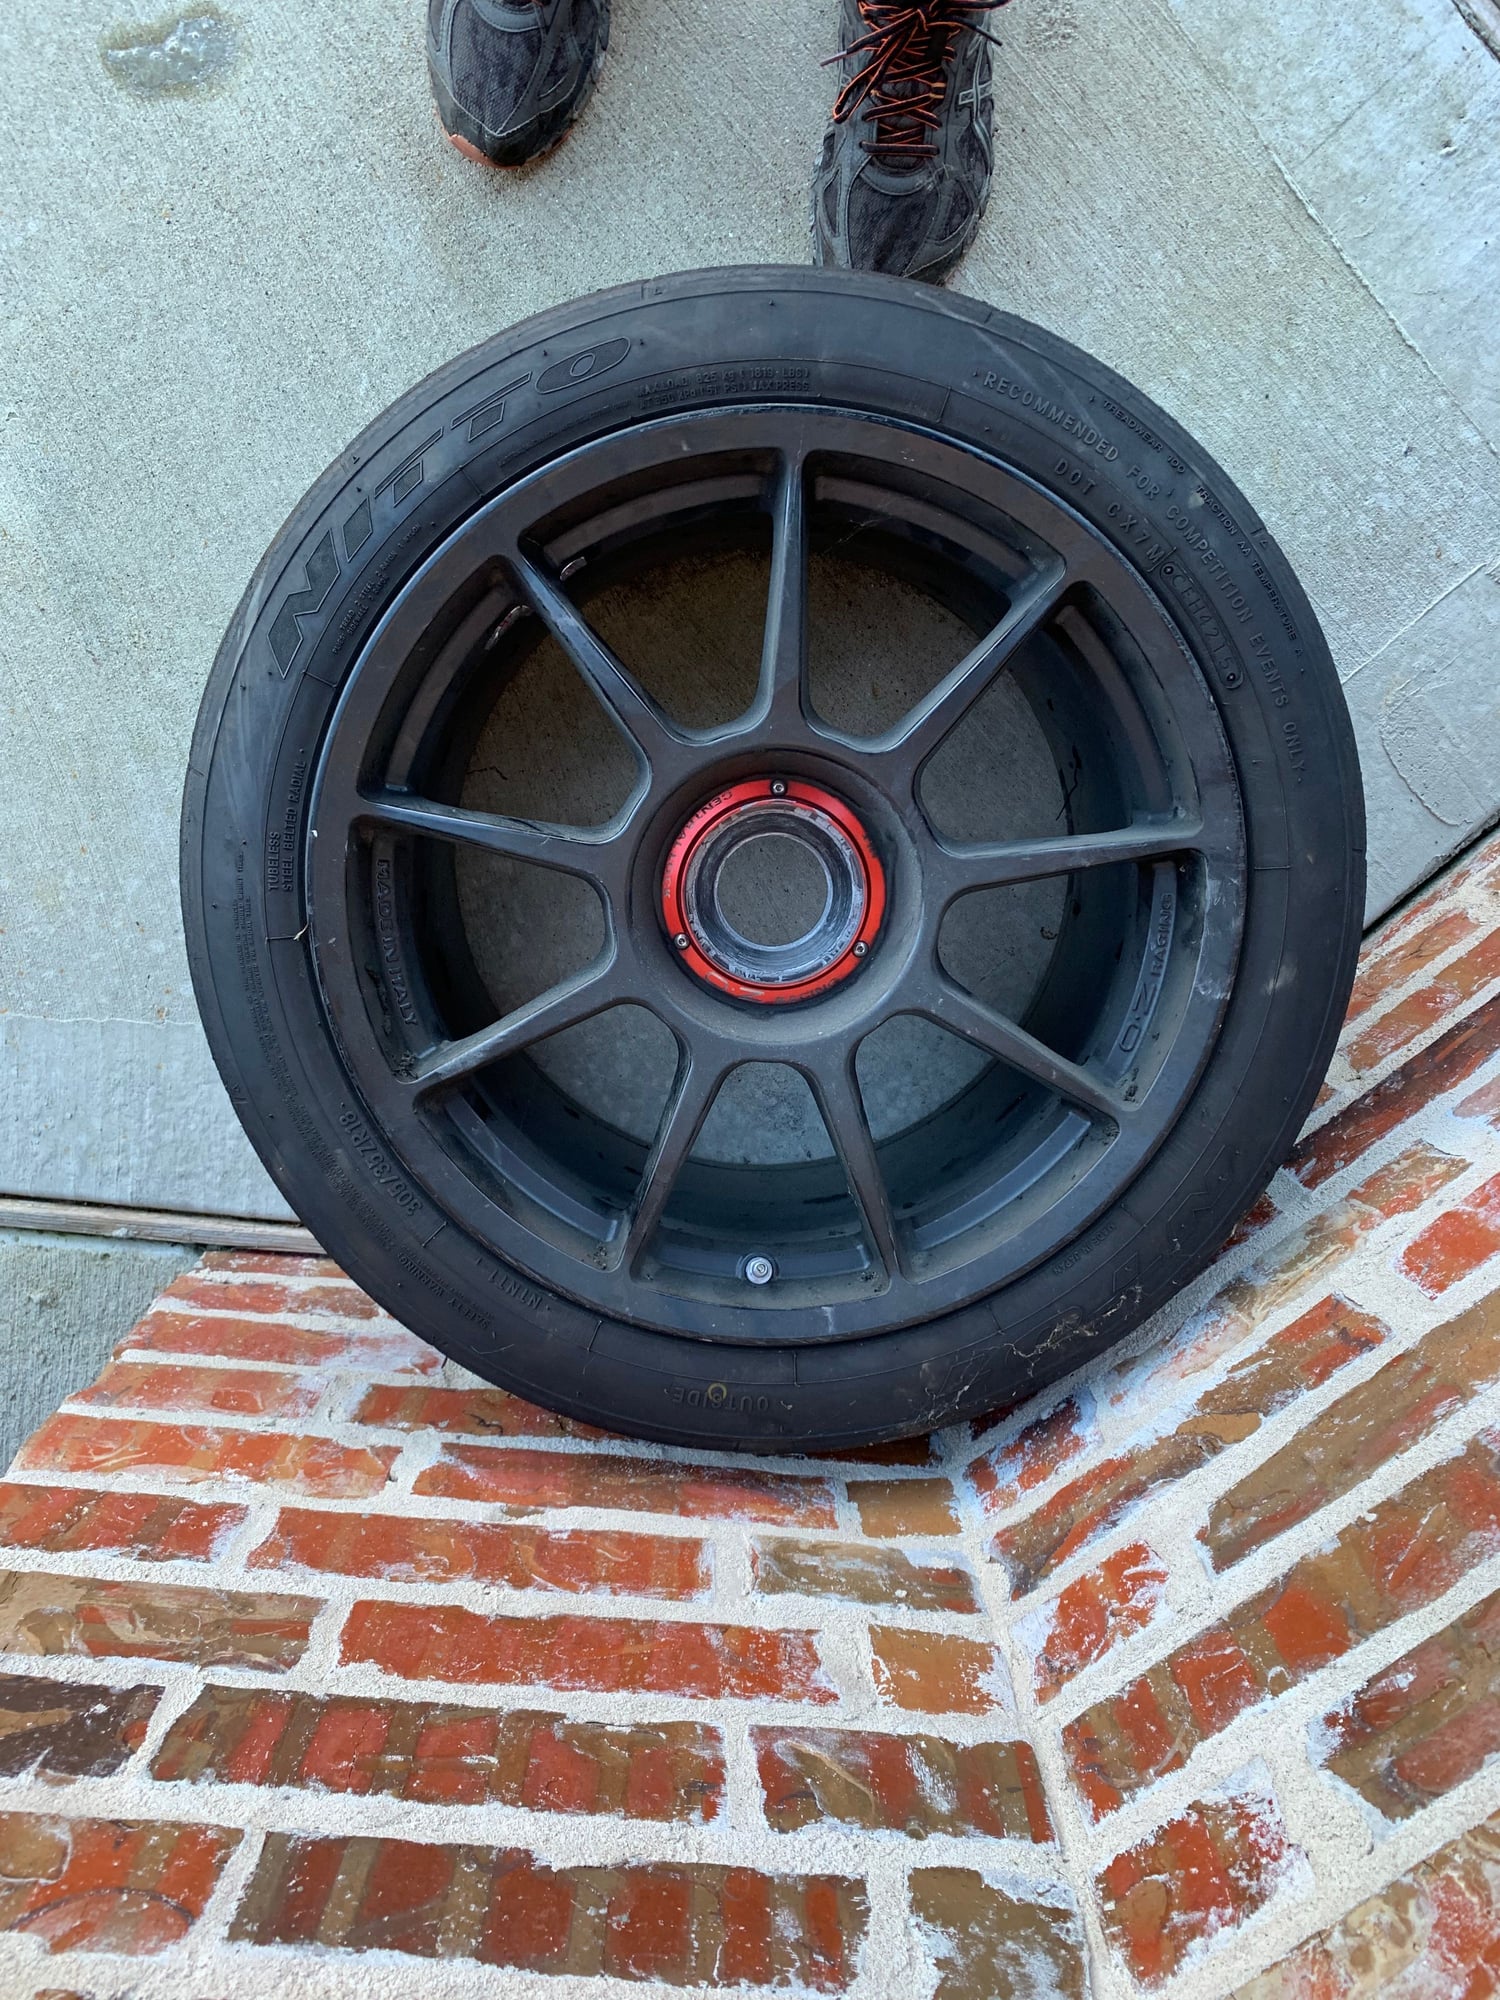 Wheels and Tires/Axles - 997.2 CL 18" GT3 OZ Wheels and NT01 Tires - Used - 2010 to 2011 Porsche GT3 - Fairview, TX 75069, United States